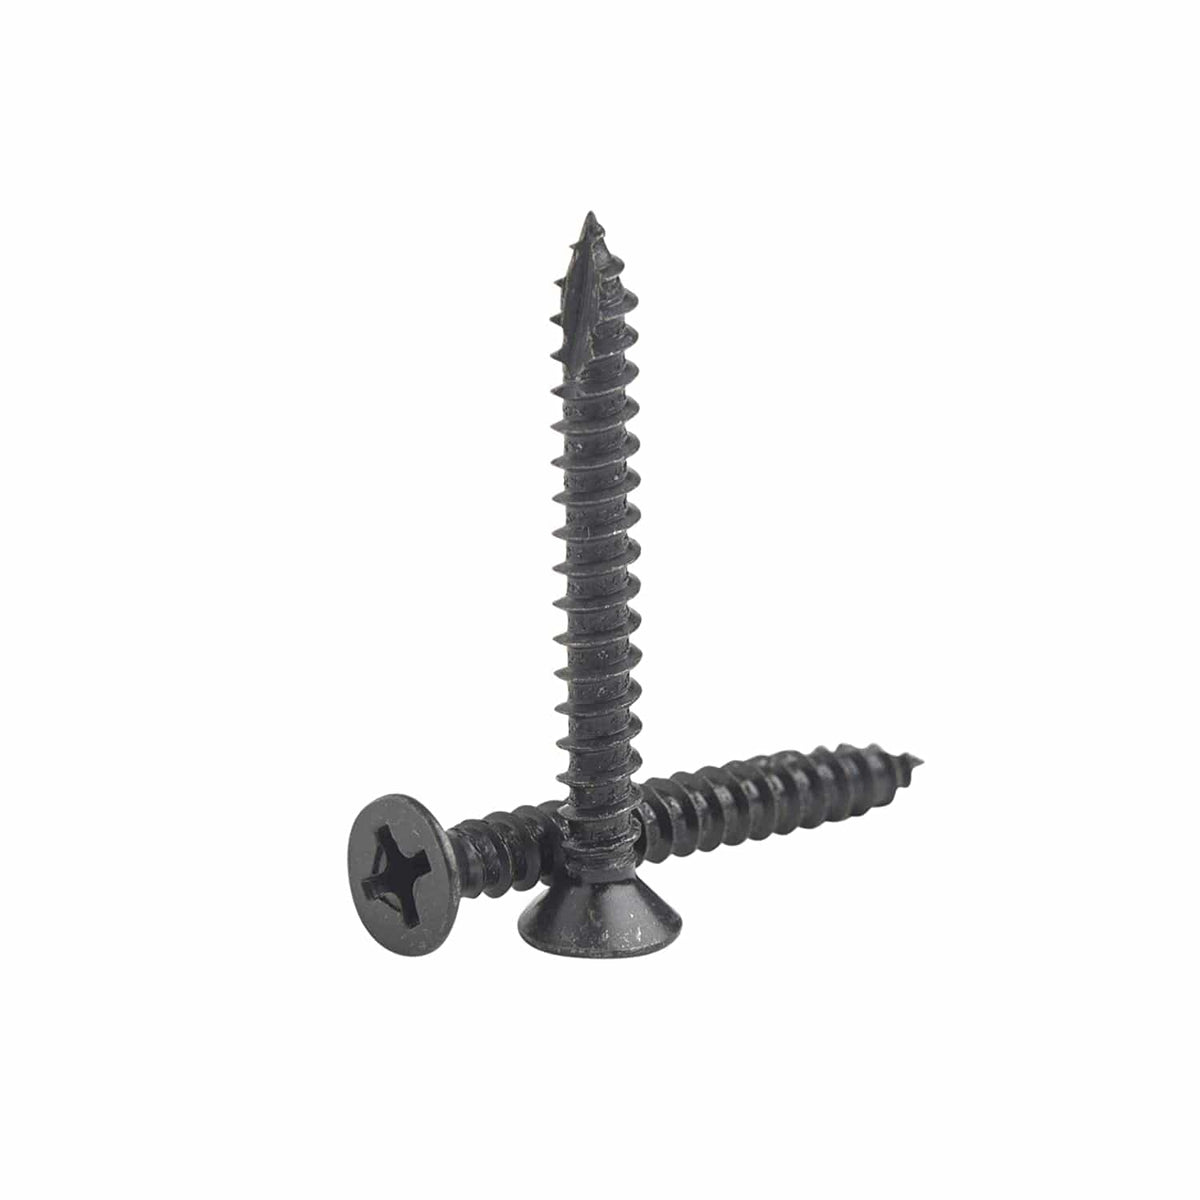 Door Hinge Wood Screws - #9 x 1-1/2" Inch - Multiple Finishes Available